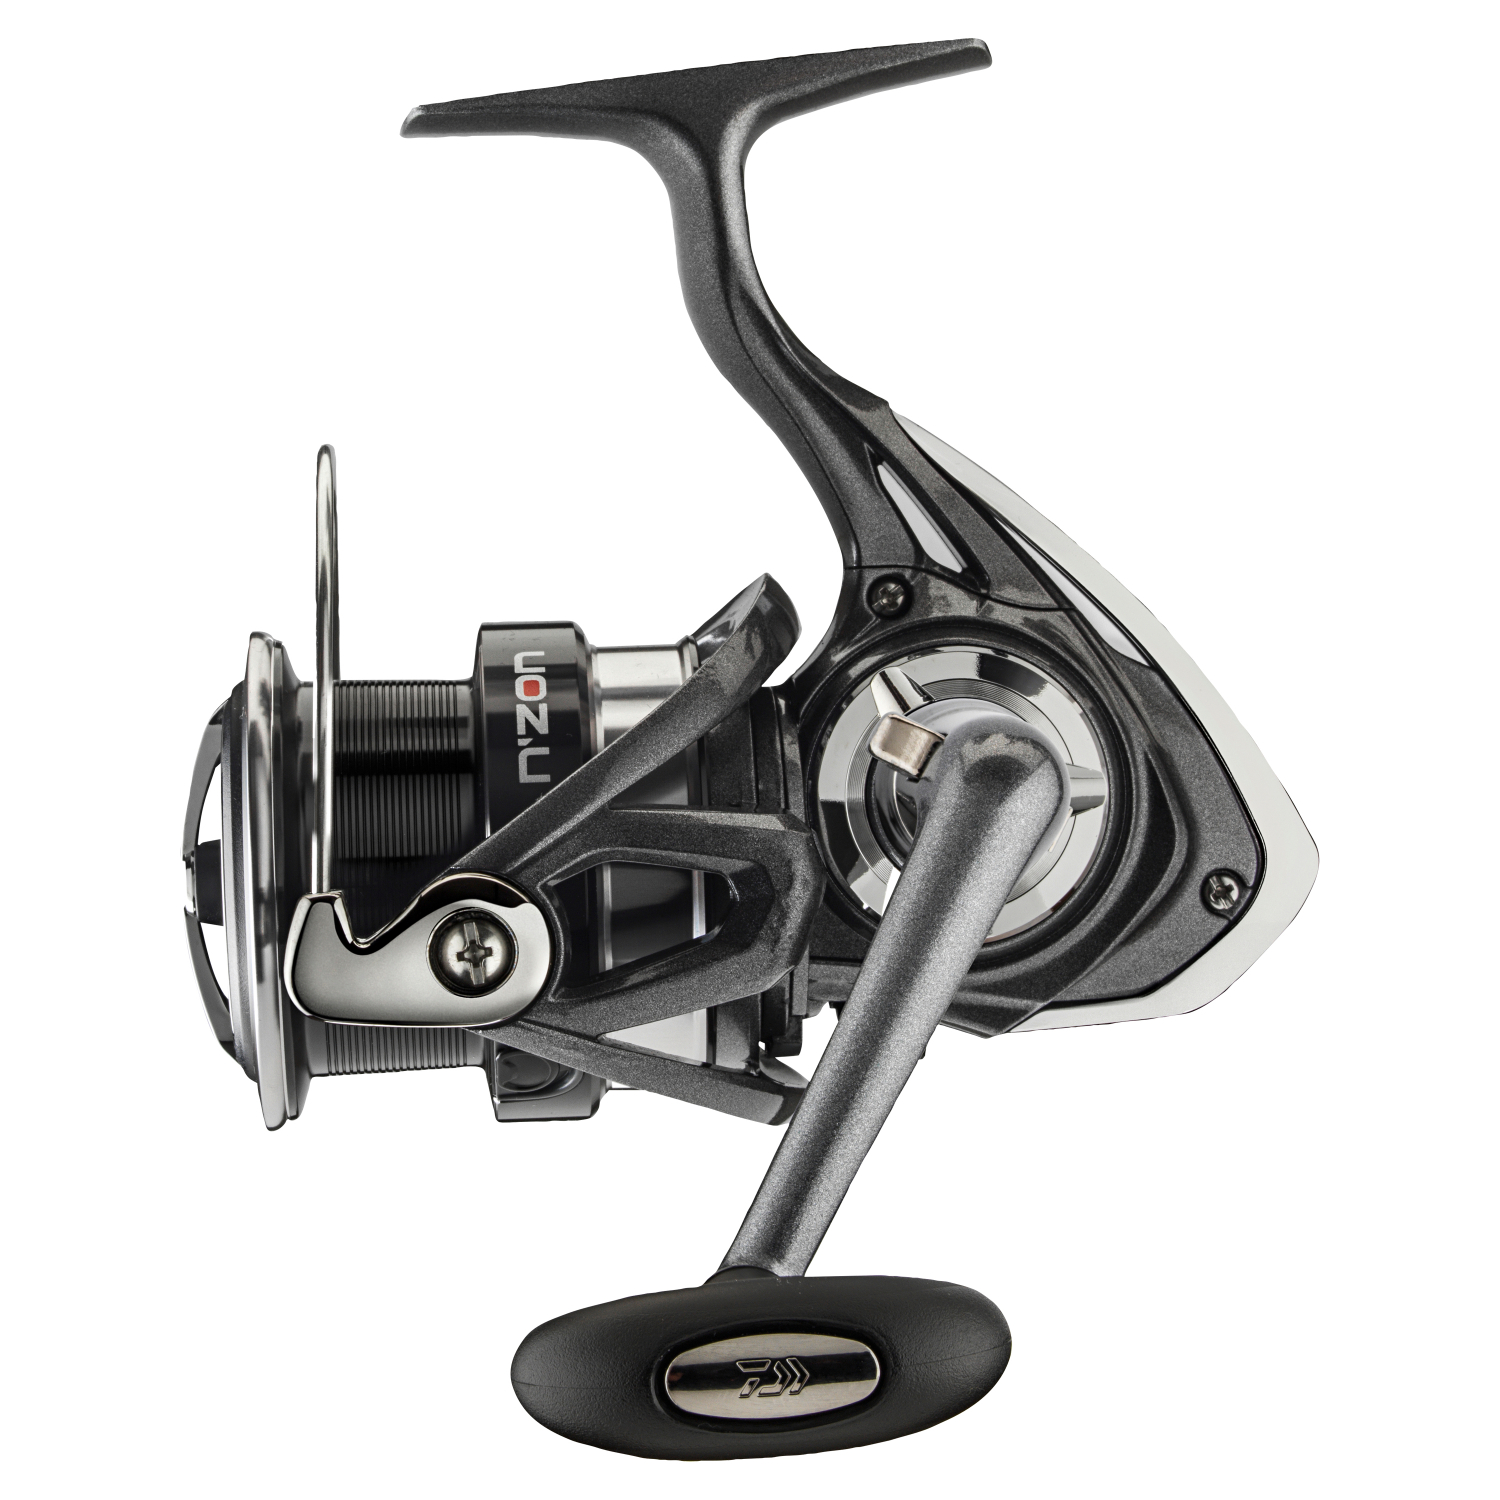 Daiwa Stationary reel NZon LT at low prices